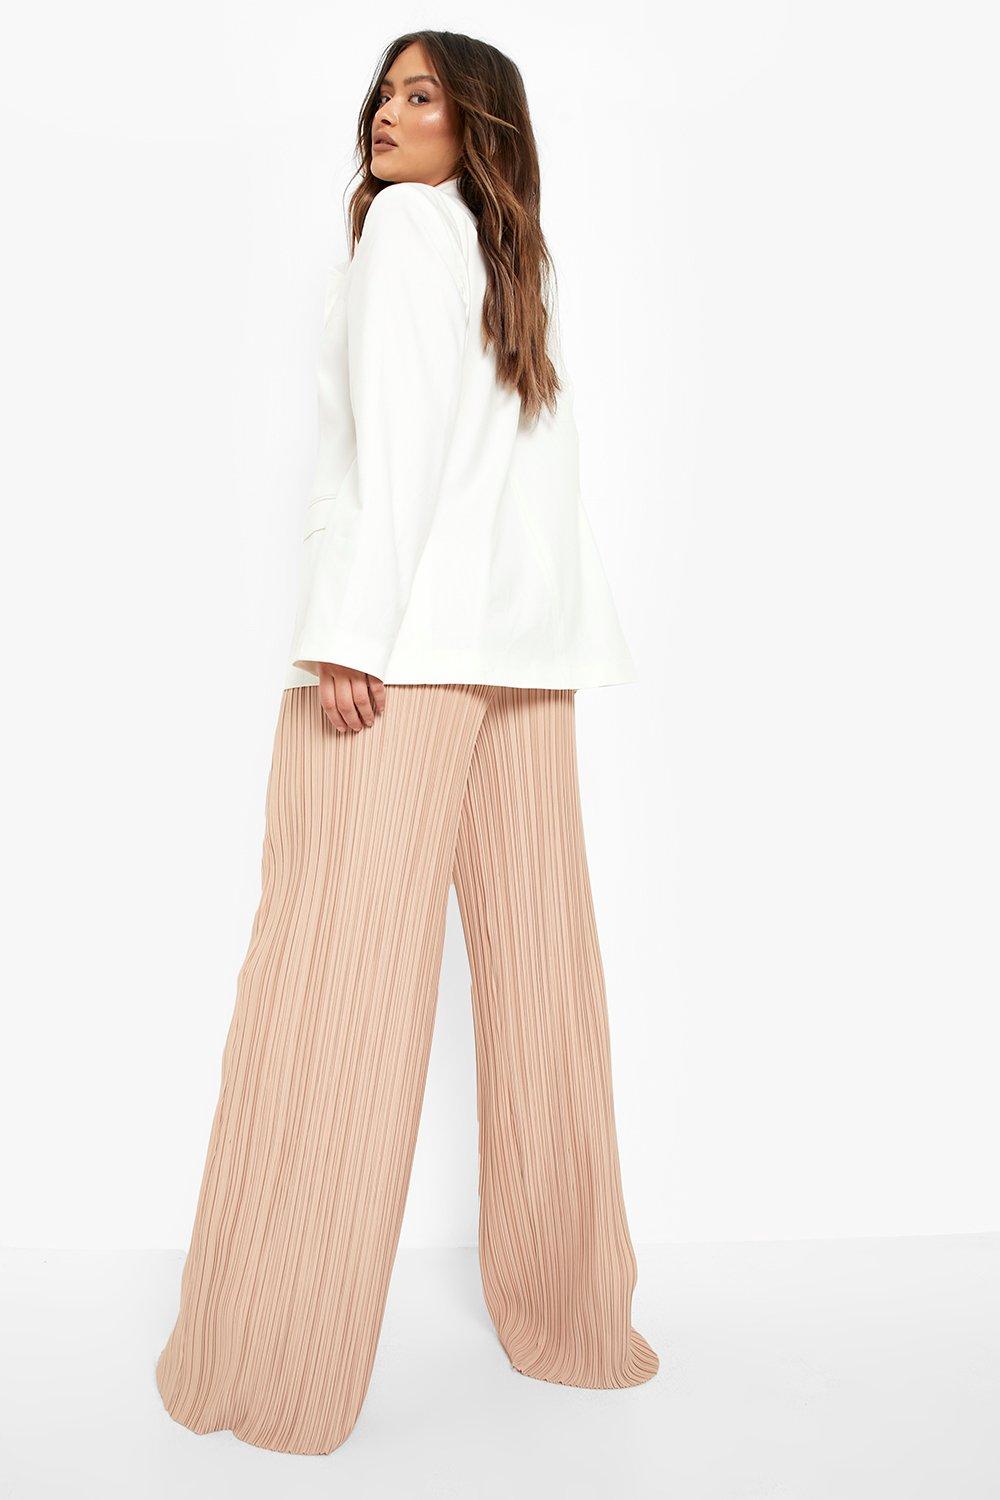 Slacks and Chinos Slacks and Chinos Boohoo Trousers Womens Trousers White Boohoo Plisse Extreme Wide Leg Drawstring Trouser in Taupe 